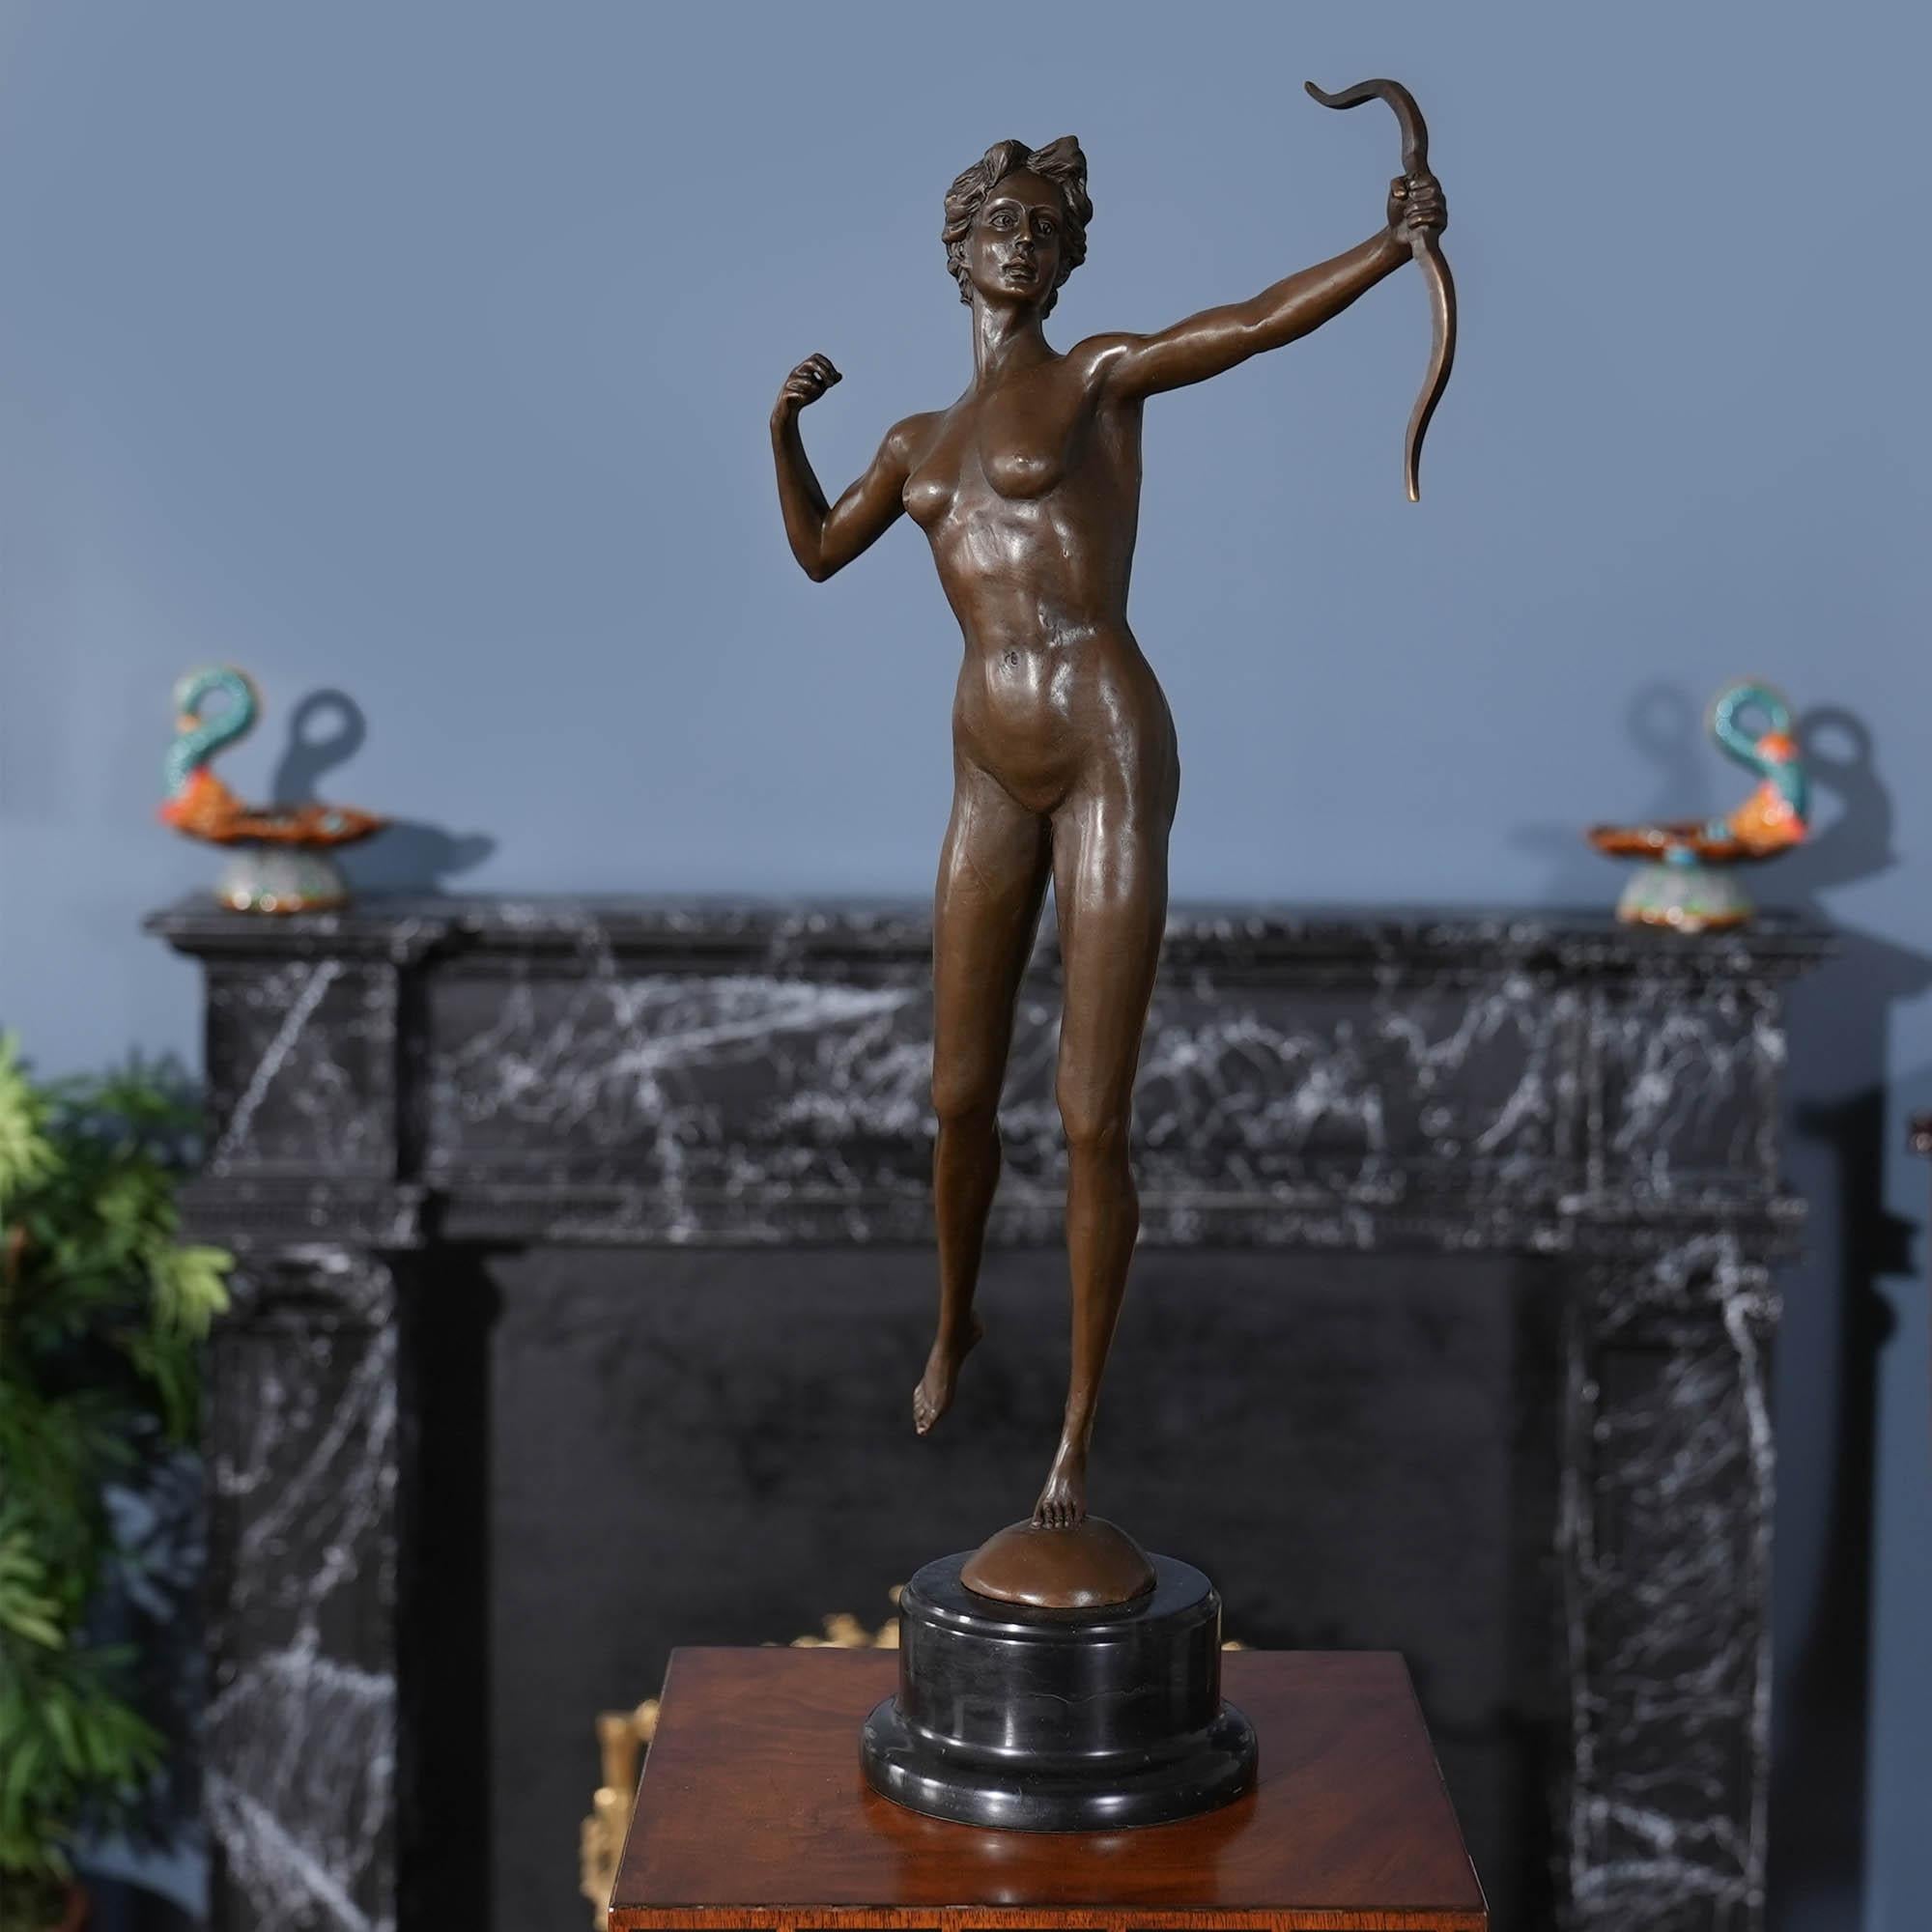 Graceful even when standing still the Bronze Diana the Huntress on Marble Base is a striking addition to any setting. Using traditional lost wax casting methods the Bronze Diana statue has hand chaised details added to give a high level of detail to